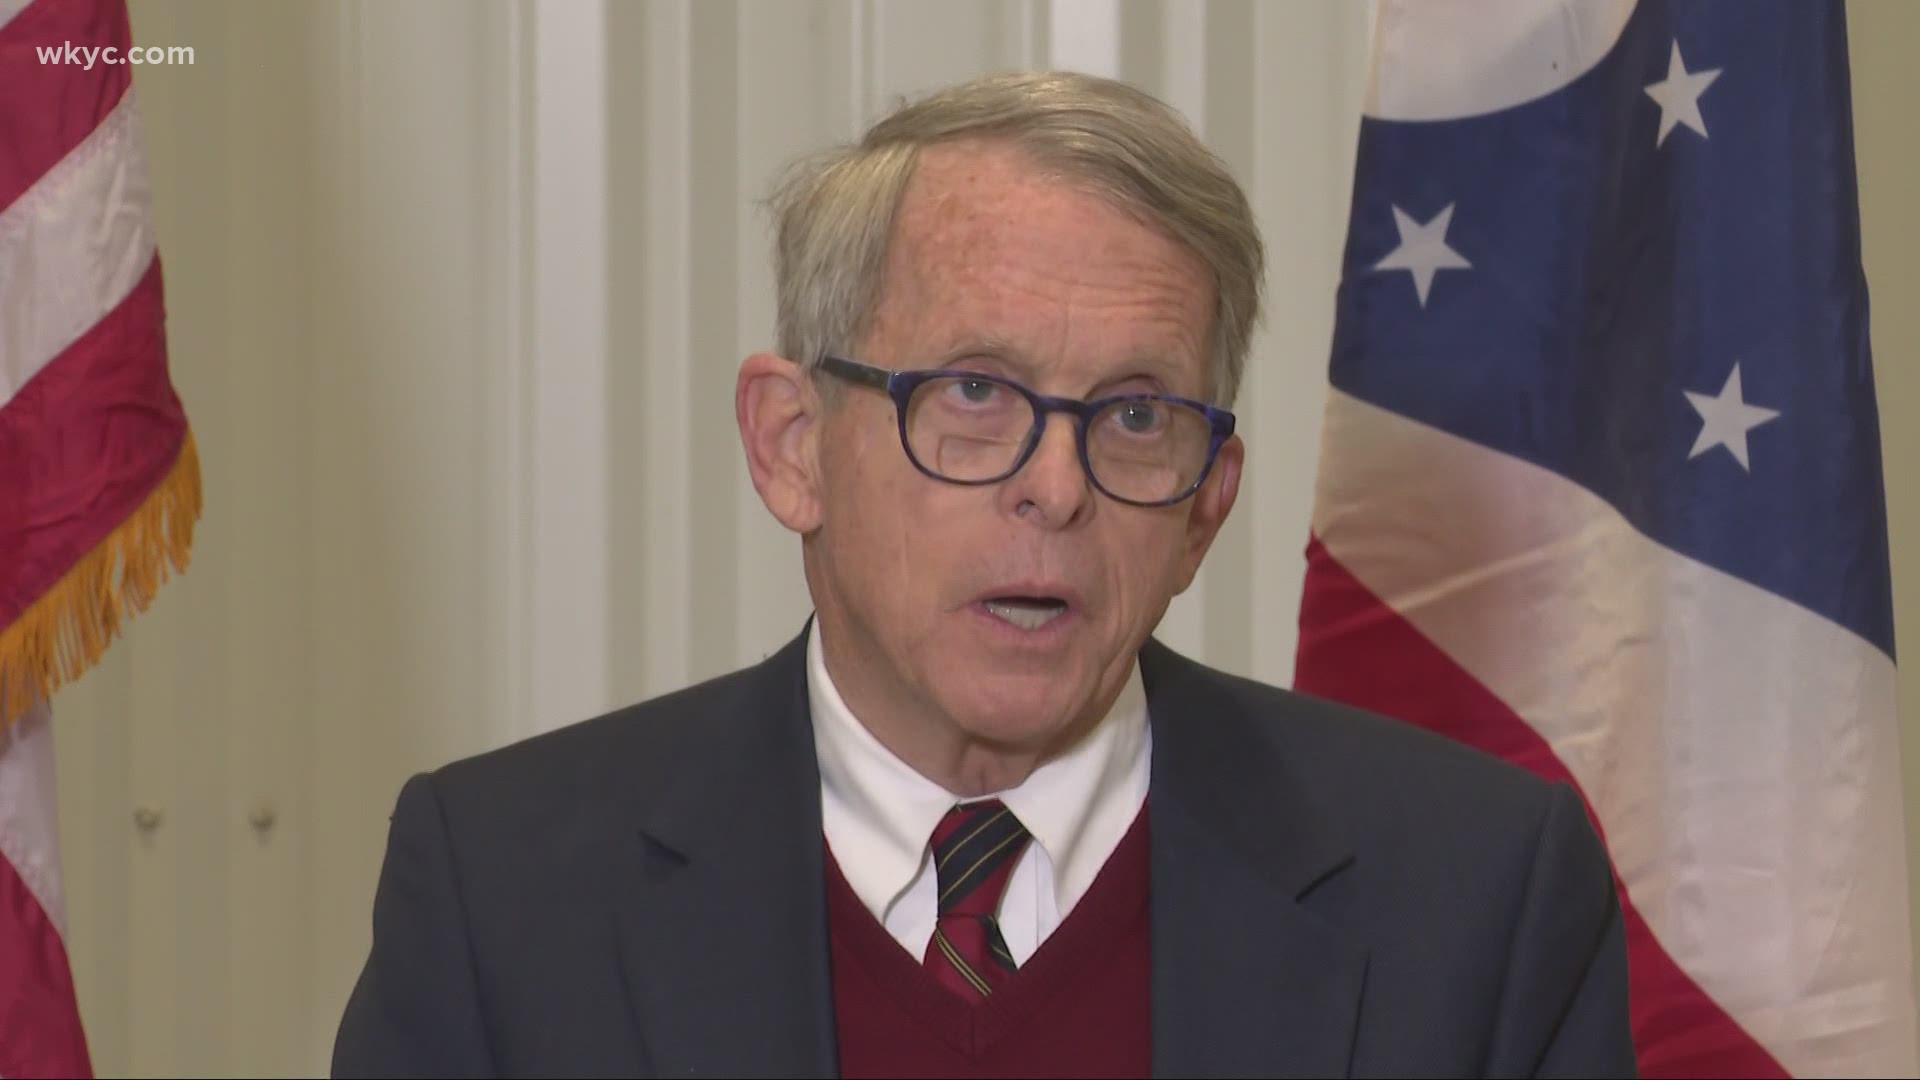 Gov. DeWine visited Toledo and Cleveland to reinforce his curfew. Brandon Simmons has the details on his message.